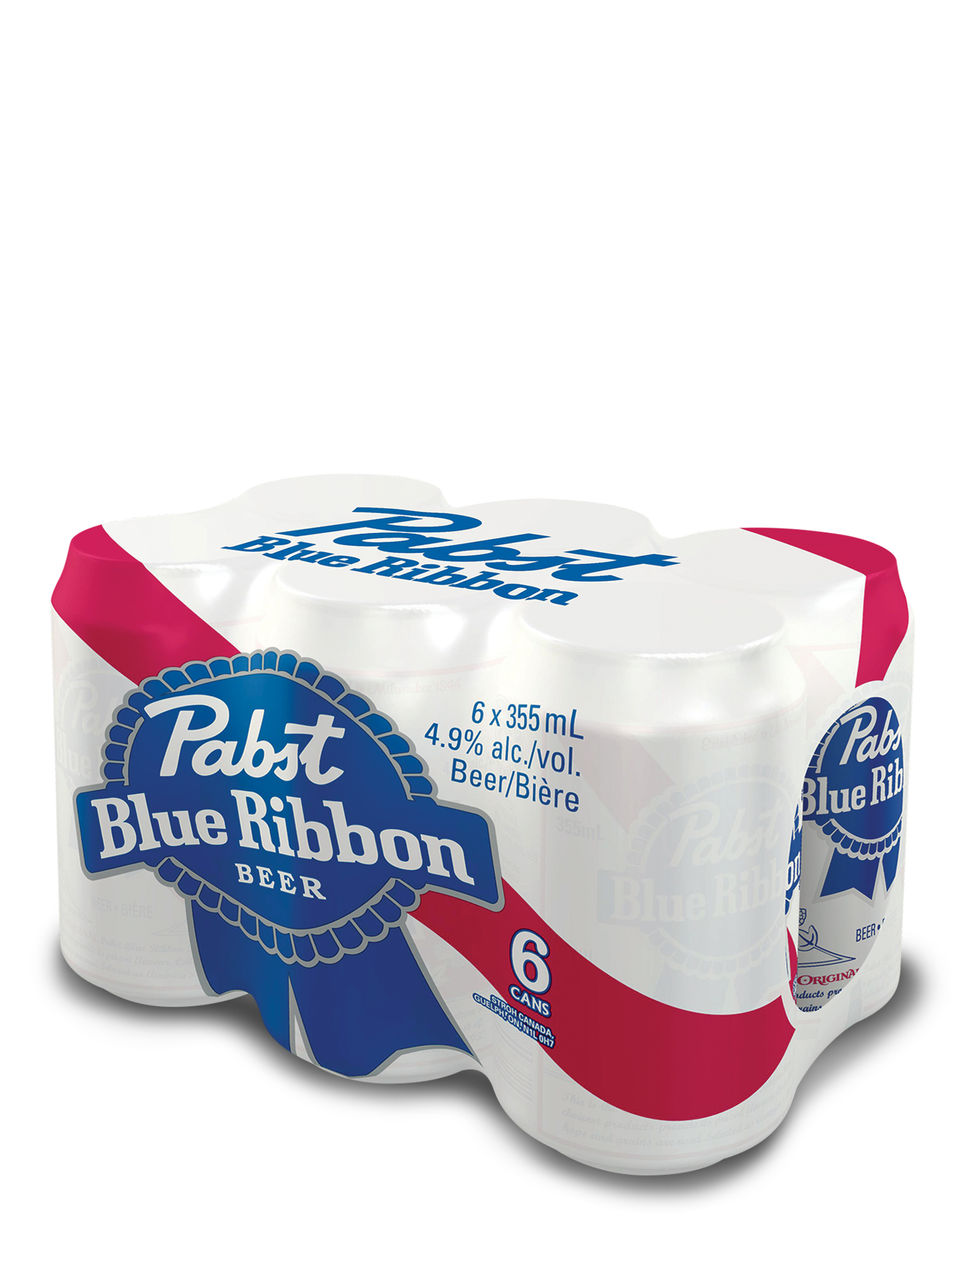 How Much Is Pabst Blue Ribbon Worth